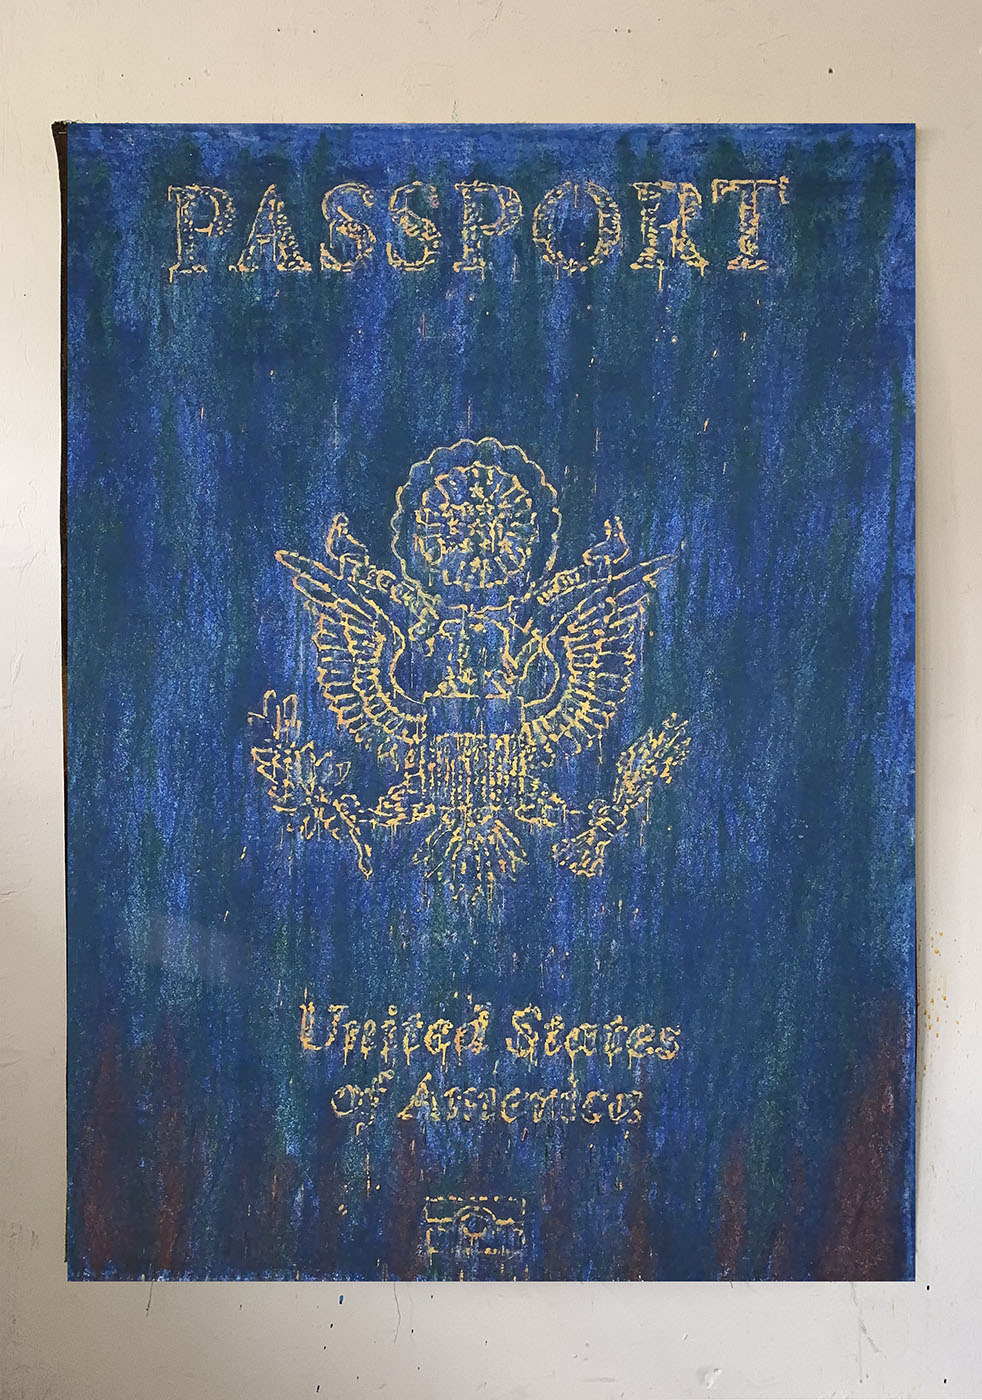 American passport, 56x45 in, mixed media on canvas, 2022.